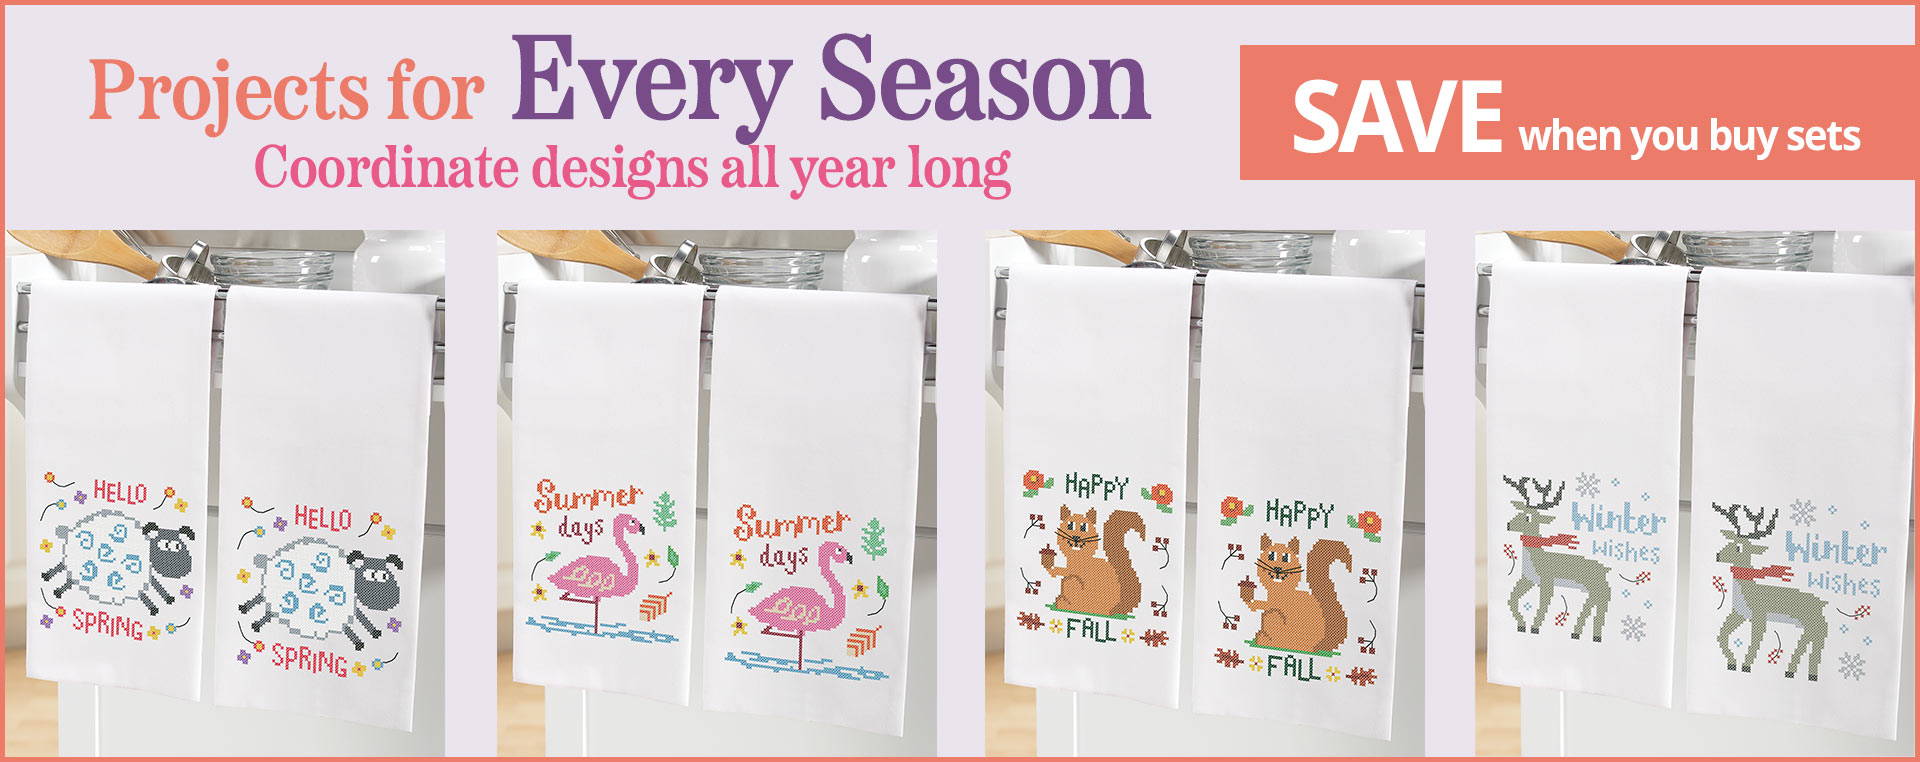 Projects for every seasons. Save on sets. Images: Seasonal Needlework Hand Towels.